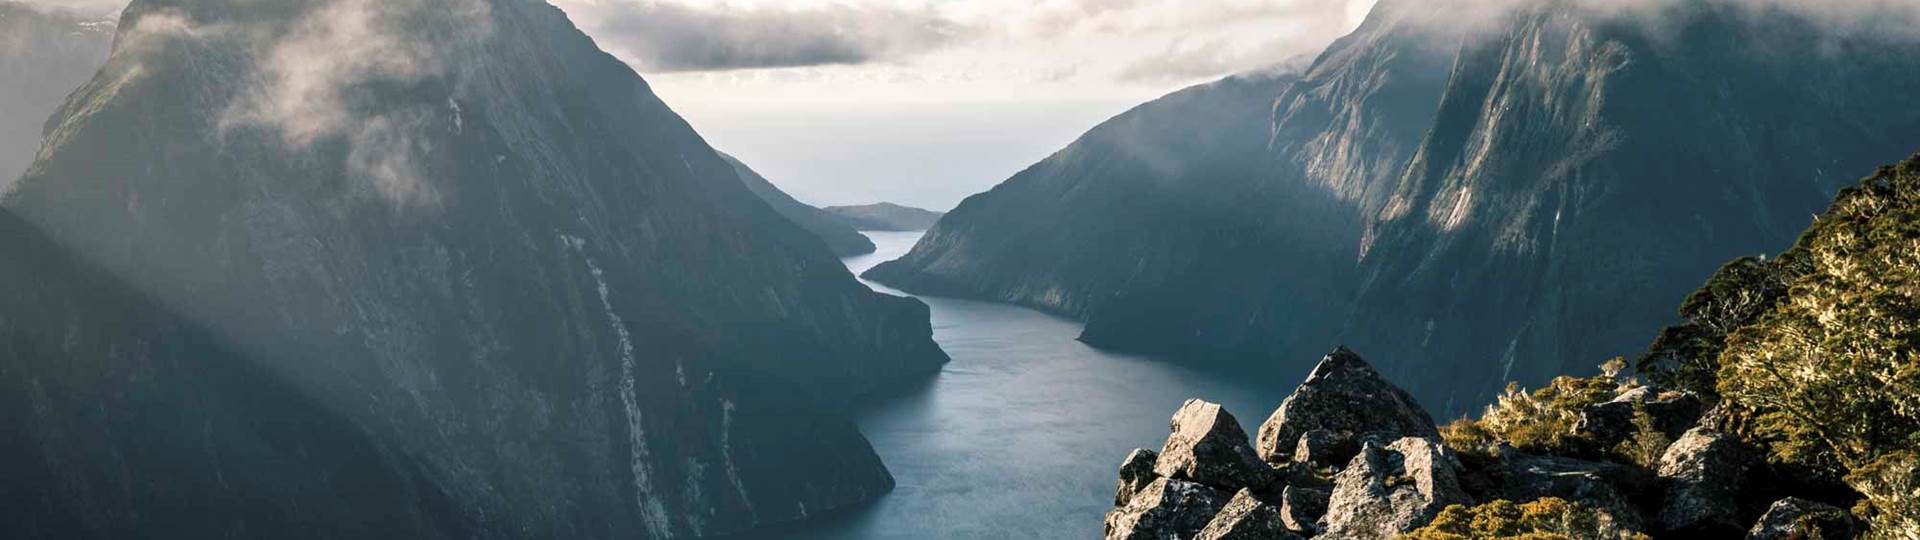 Drone shot of Milford Sound from above